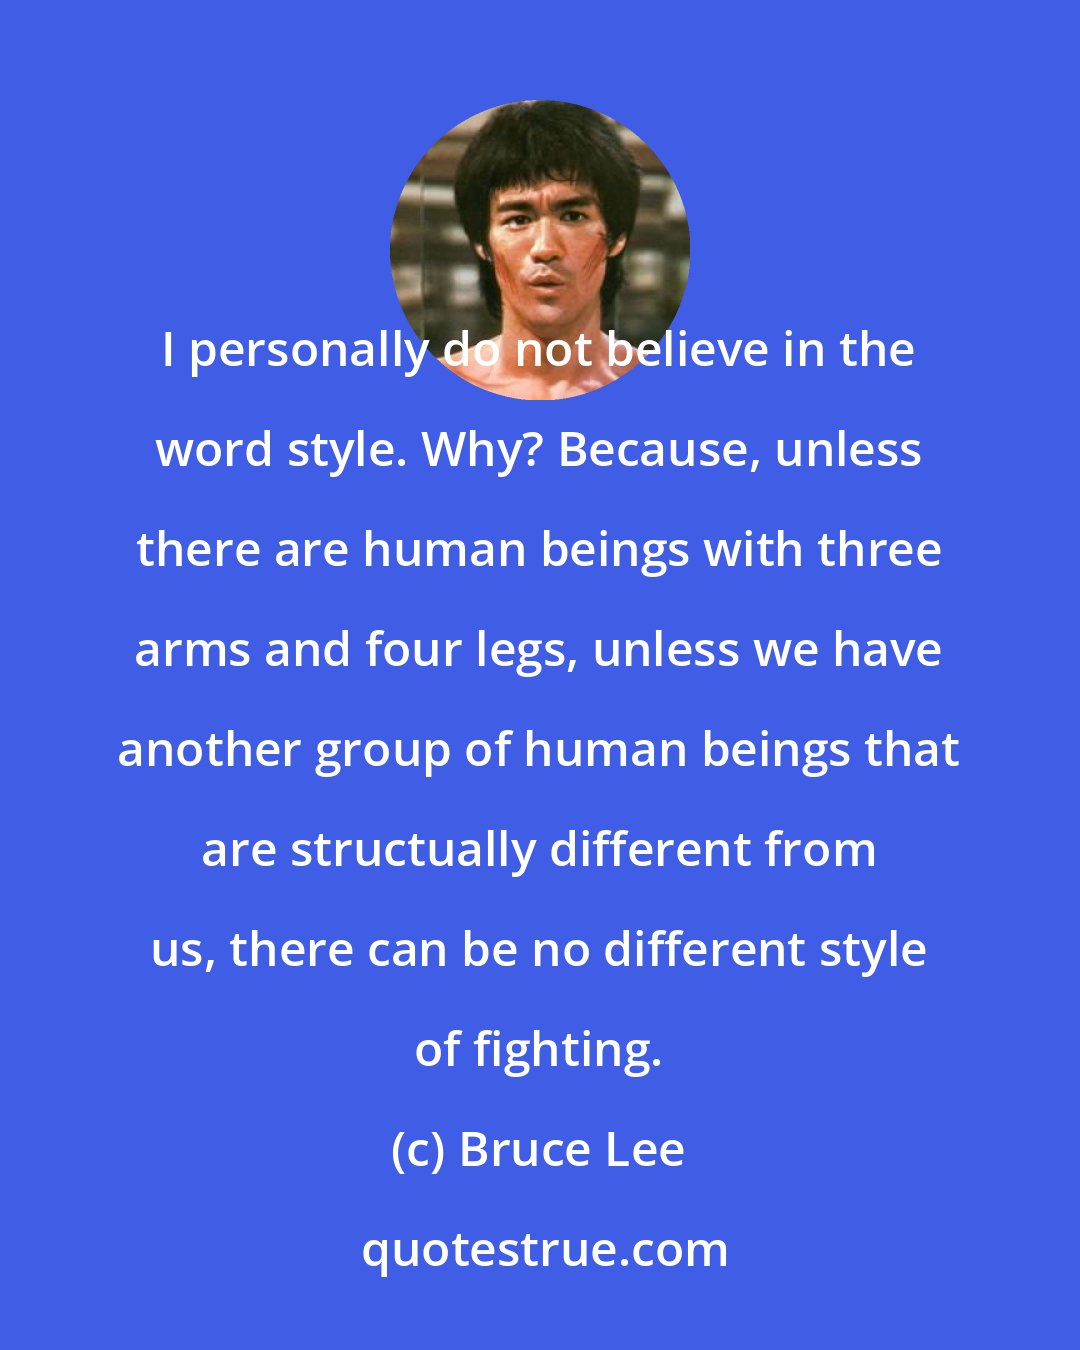 Bruce Lee: I personally do not believe in the word style. Why? Because, unless there are human beings with three arms and four legs, unless we have another group of human beings that are structually different from us, there can be no different style of fighting.